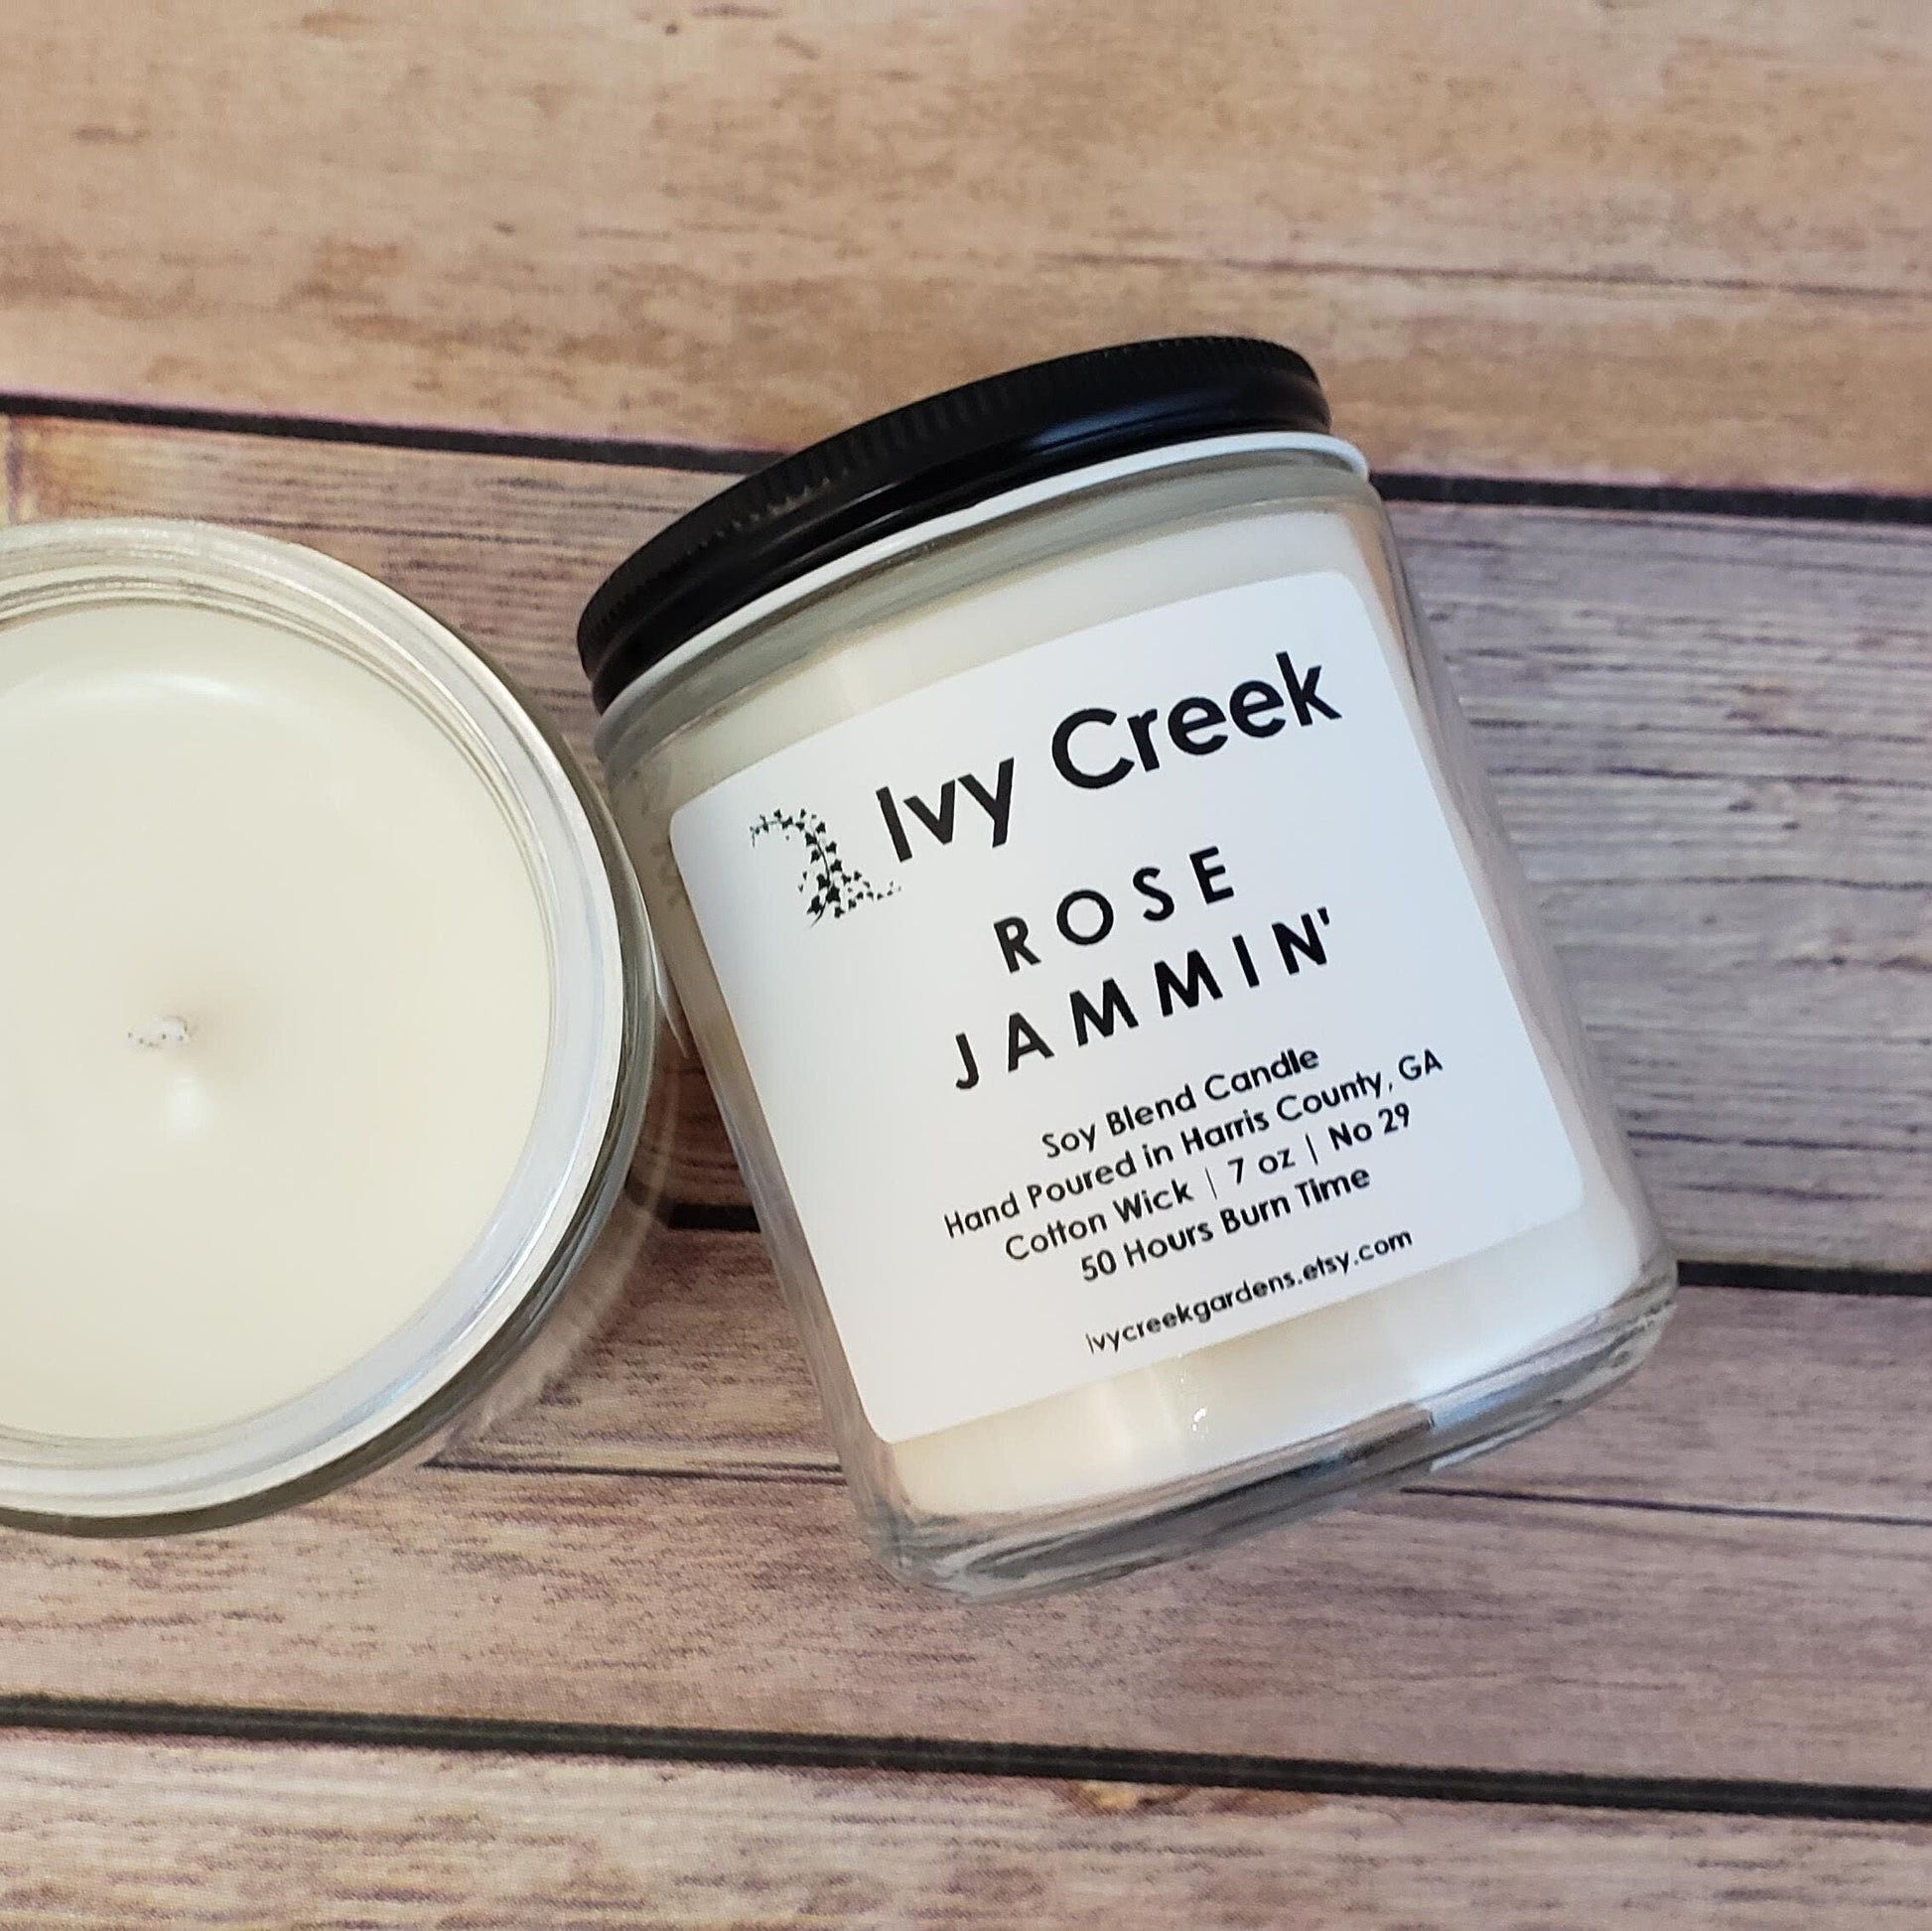 Ivy Creek No 29 Rose Jammin' Soy Blend Candle - 7 oz, Hand Poured, Cotton Wick, Small Batch, Clean Burning, Container Candle